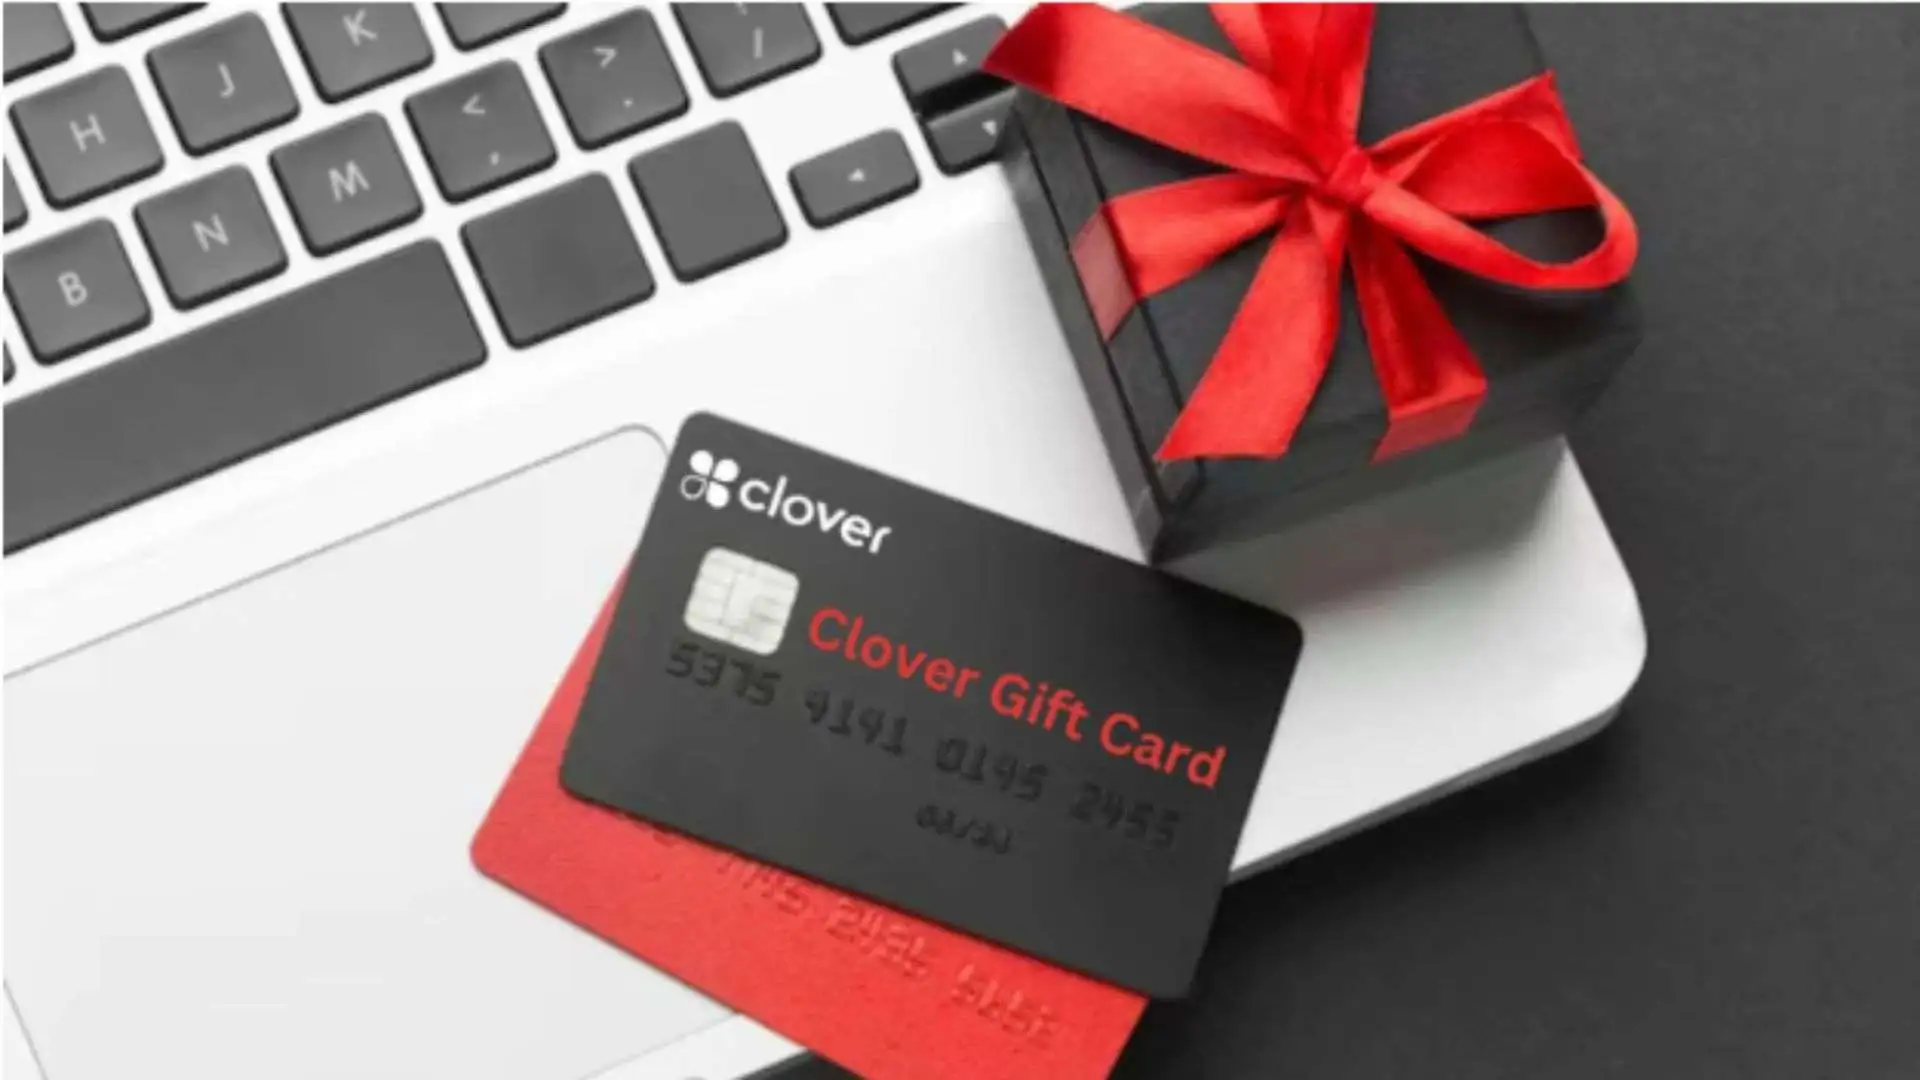 How To Check Clover Gift Card Balance?